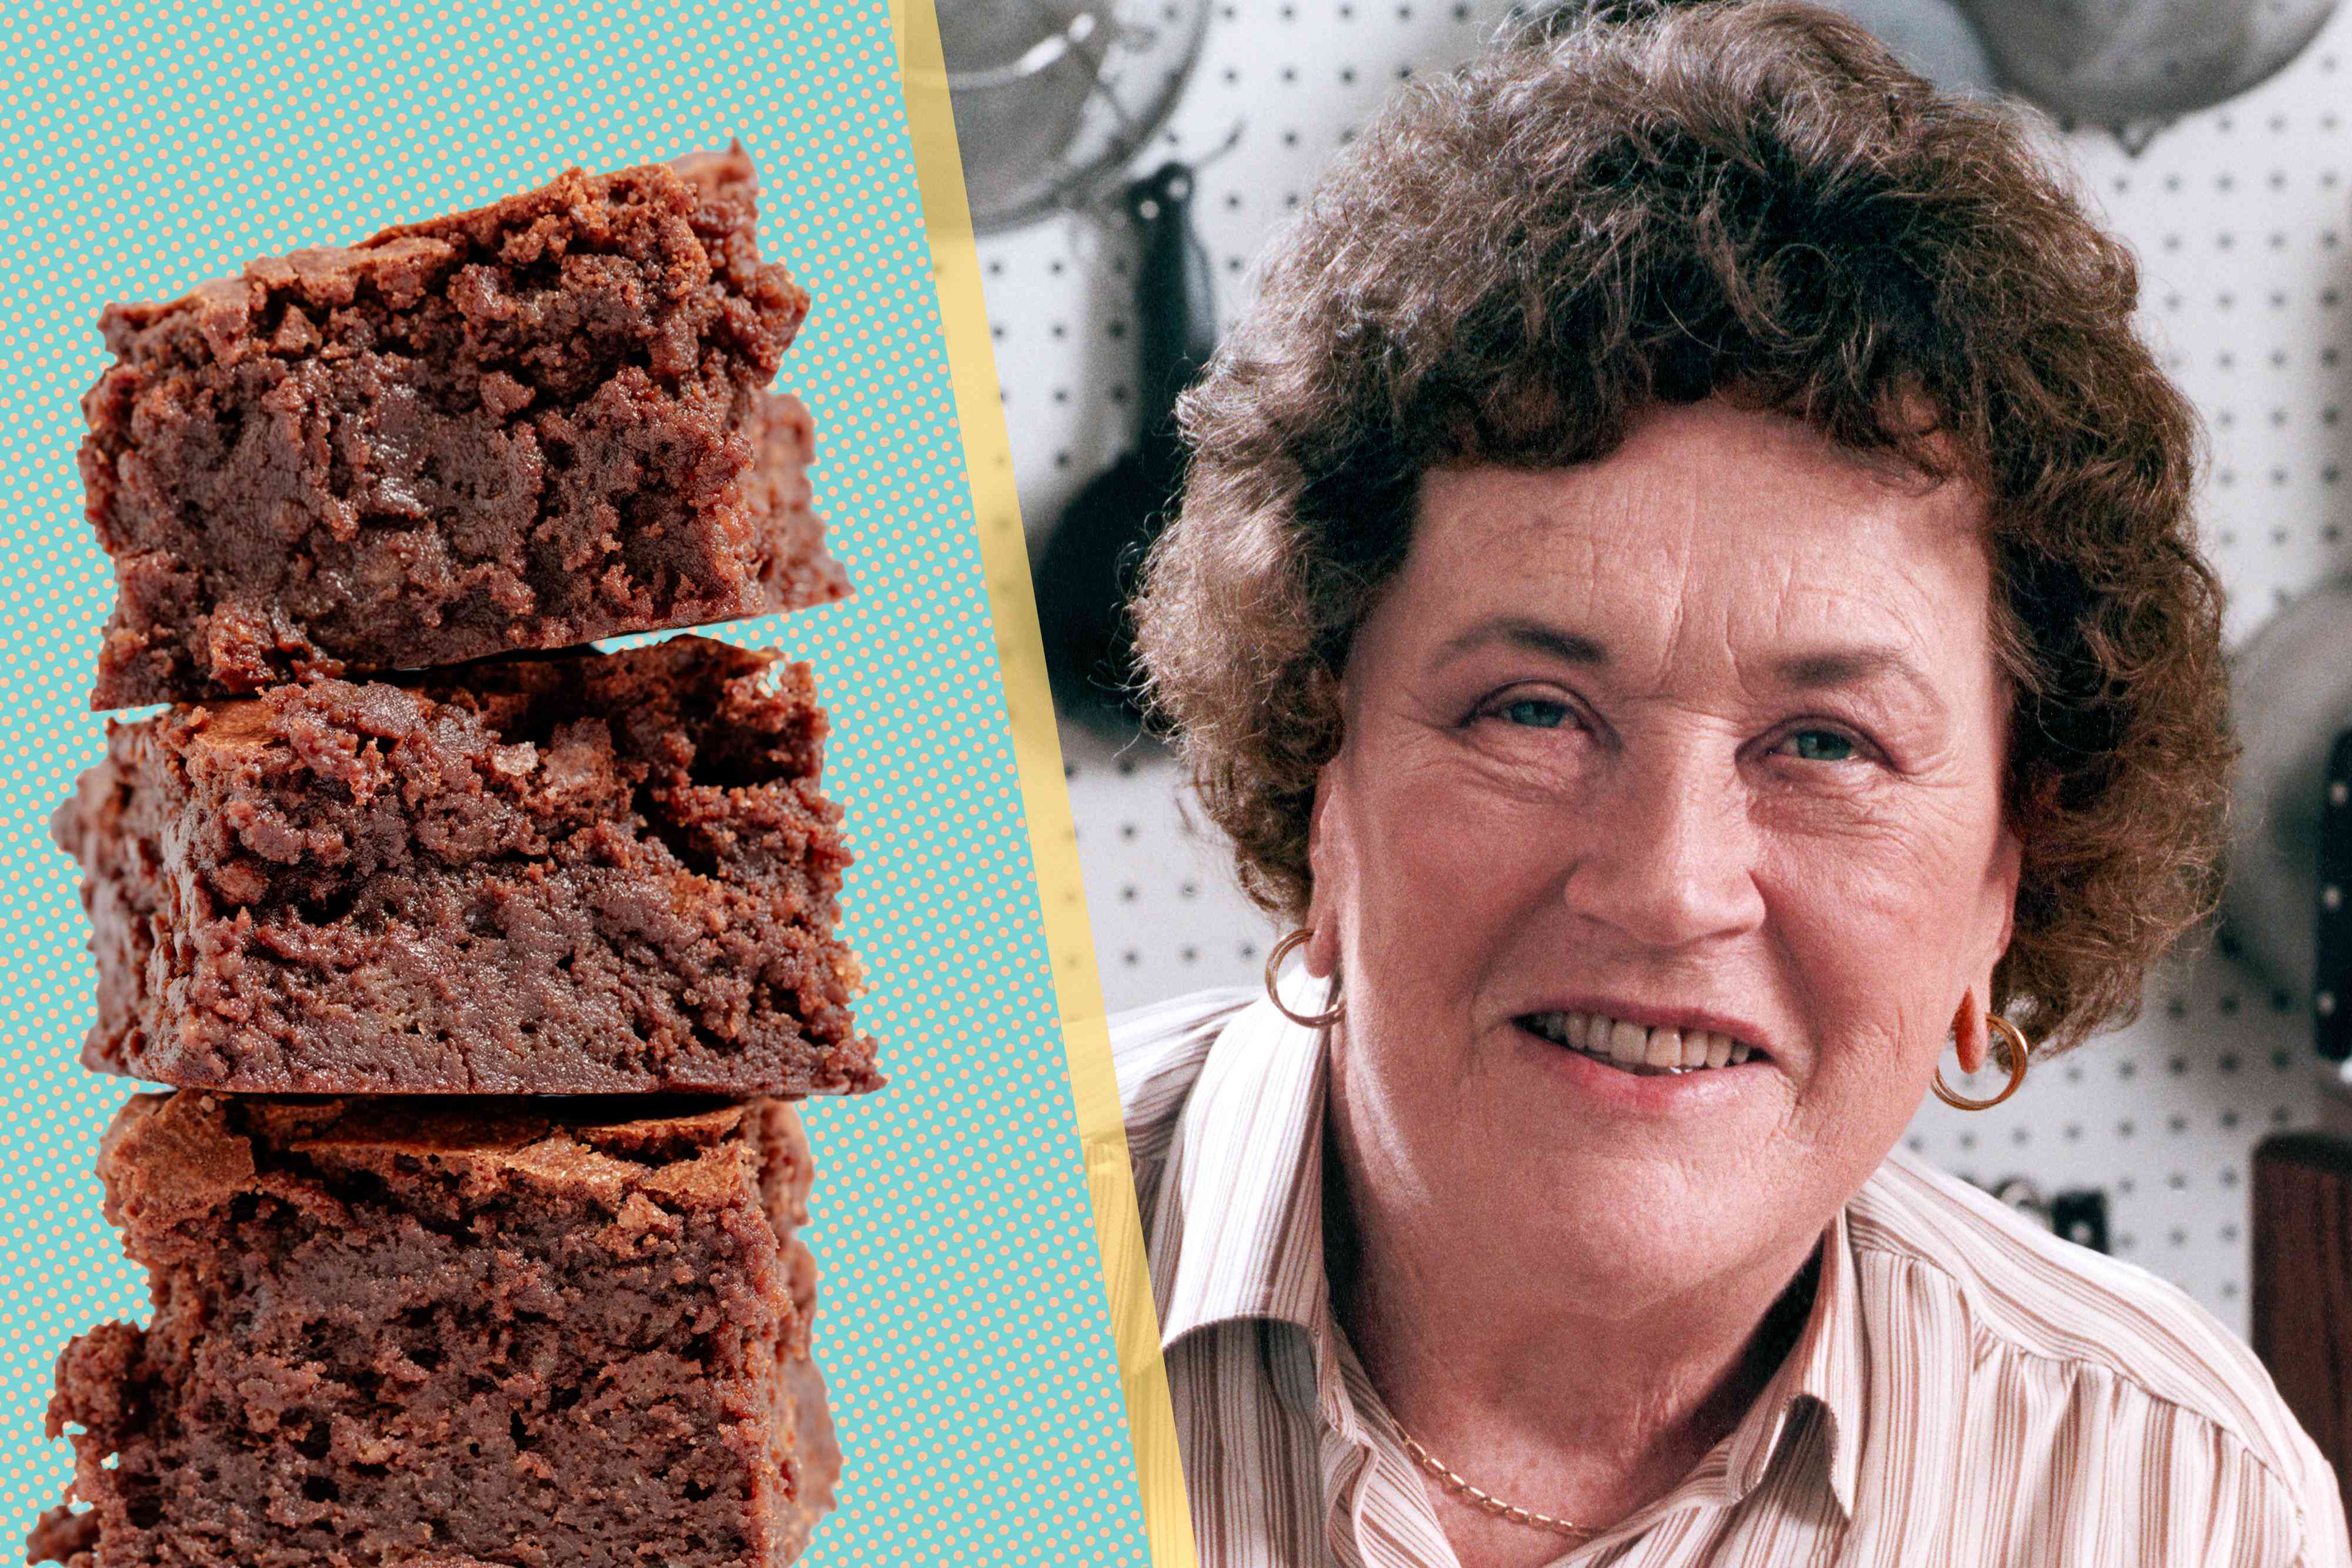 Julia Child’s Brownies Are My Favorite—They Are "Literally Perfect"